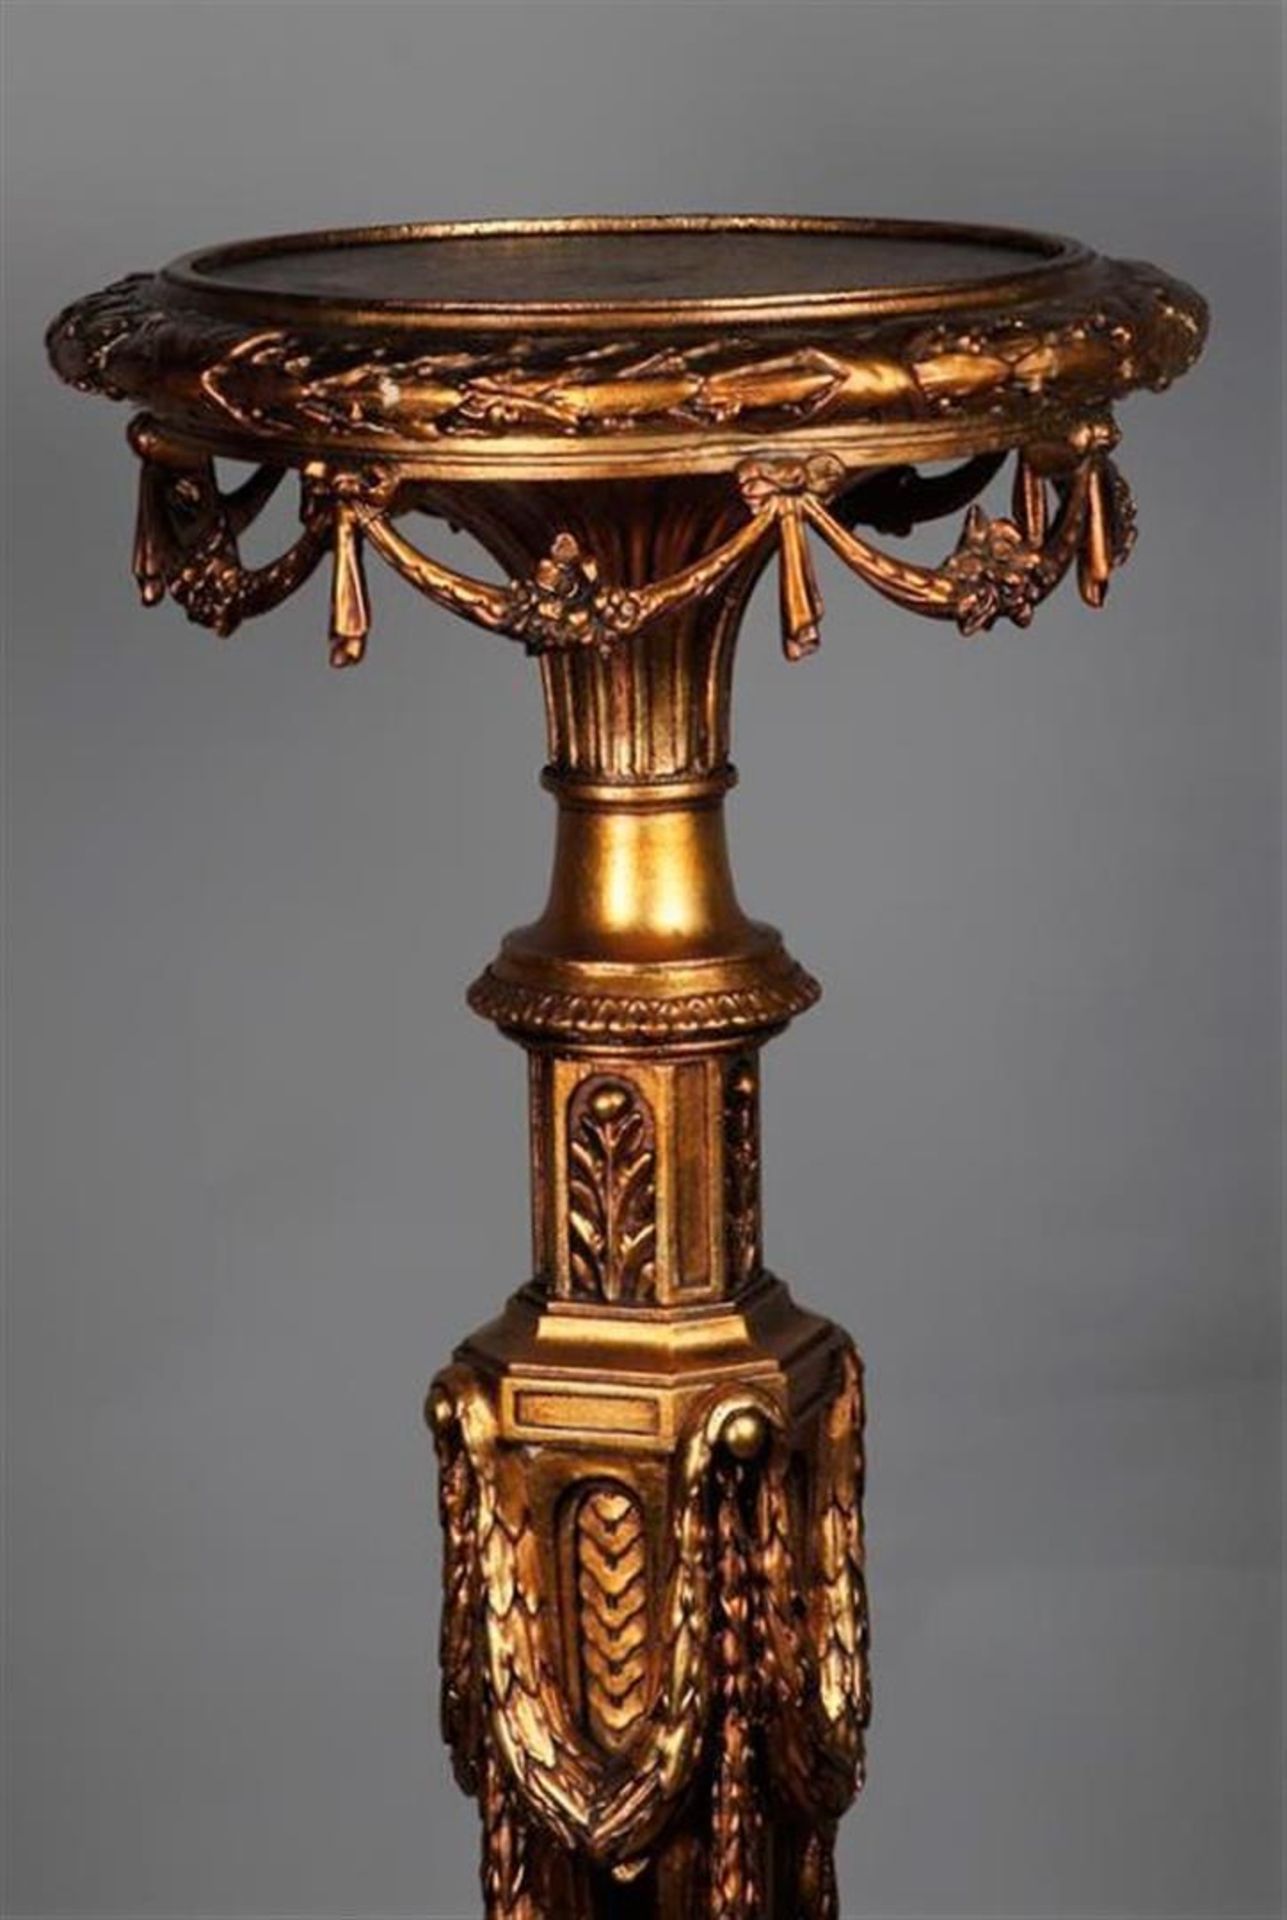 A richly decorated, bronzed wooden pedestal after an older example, 20th century. - Image 4 of 4